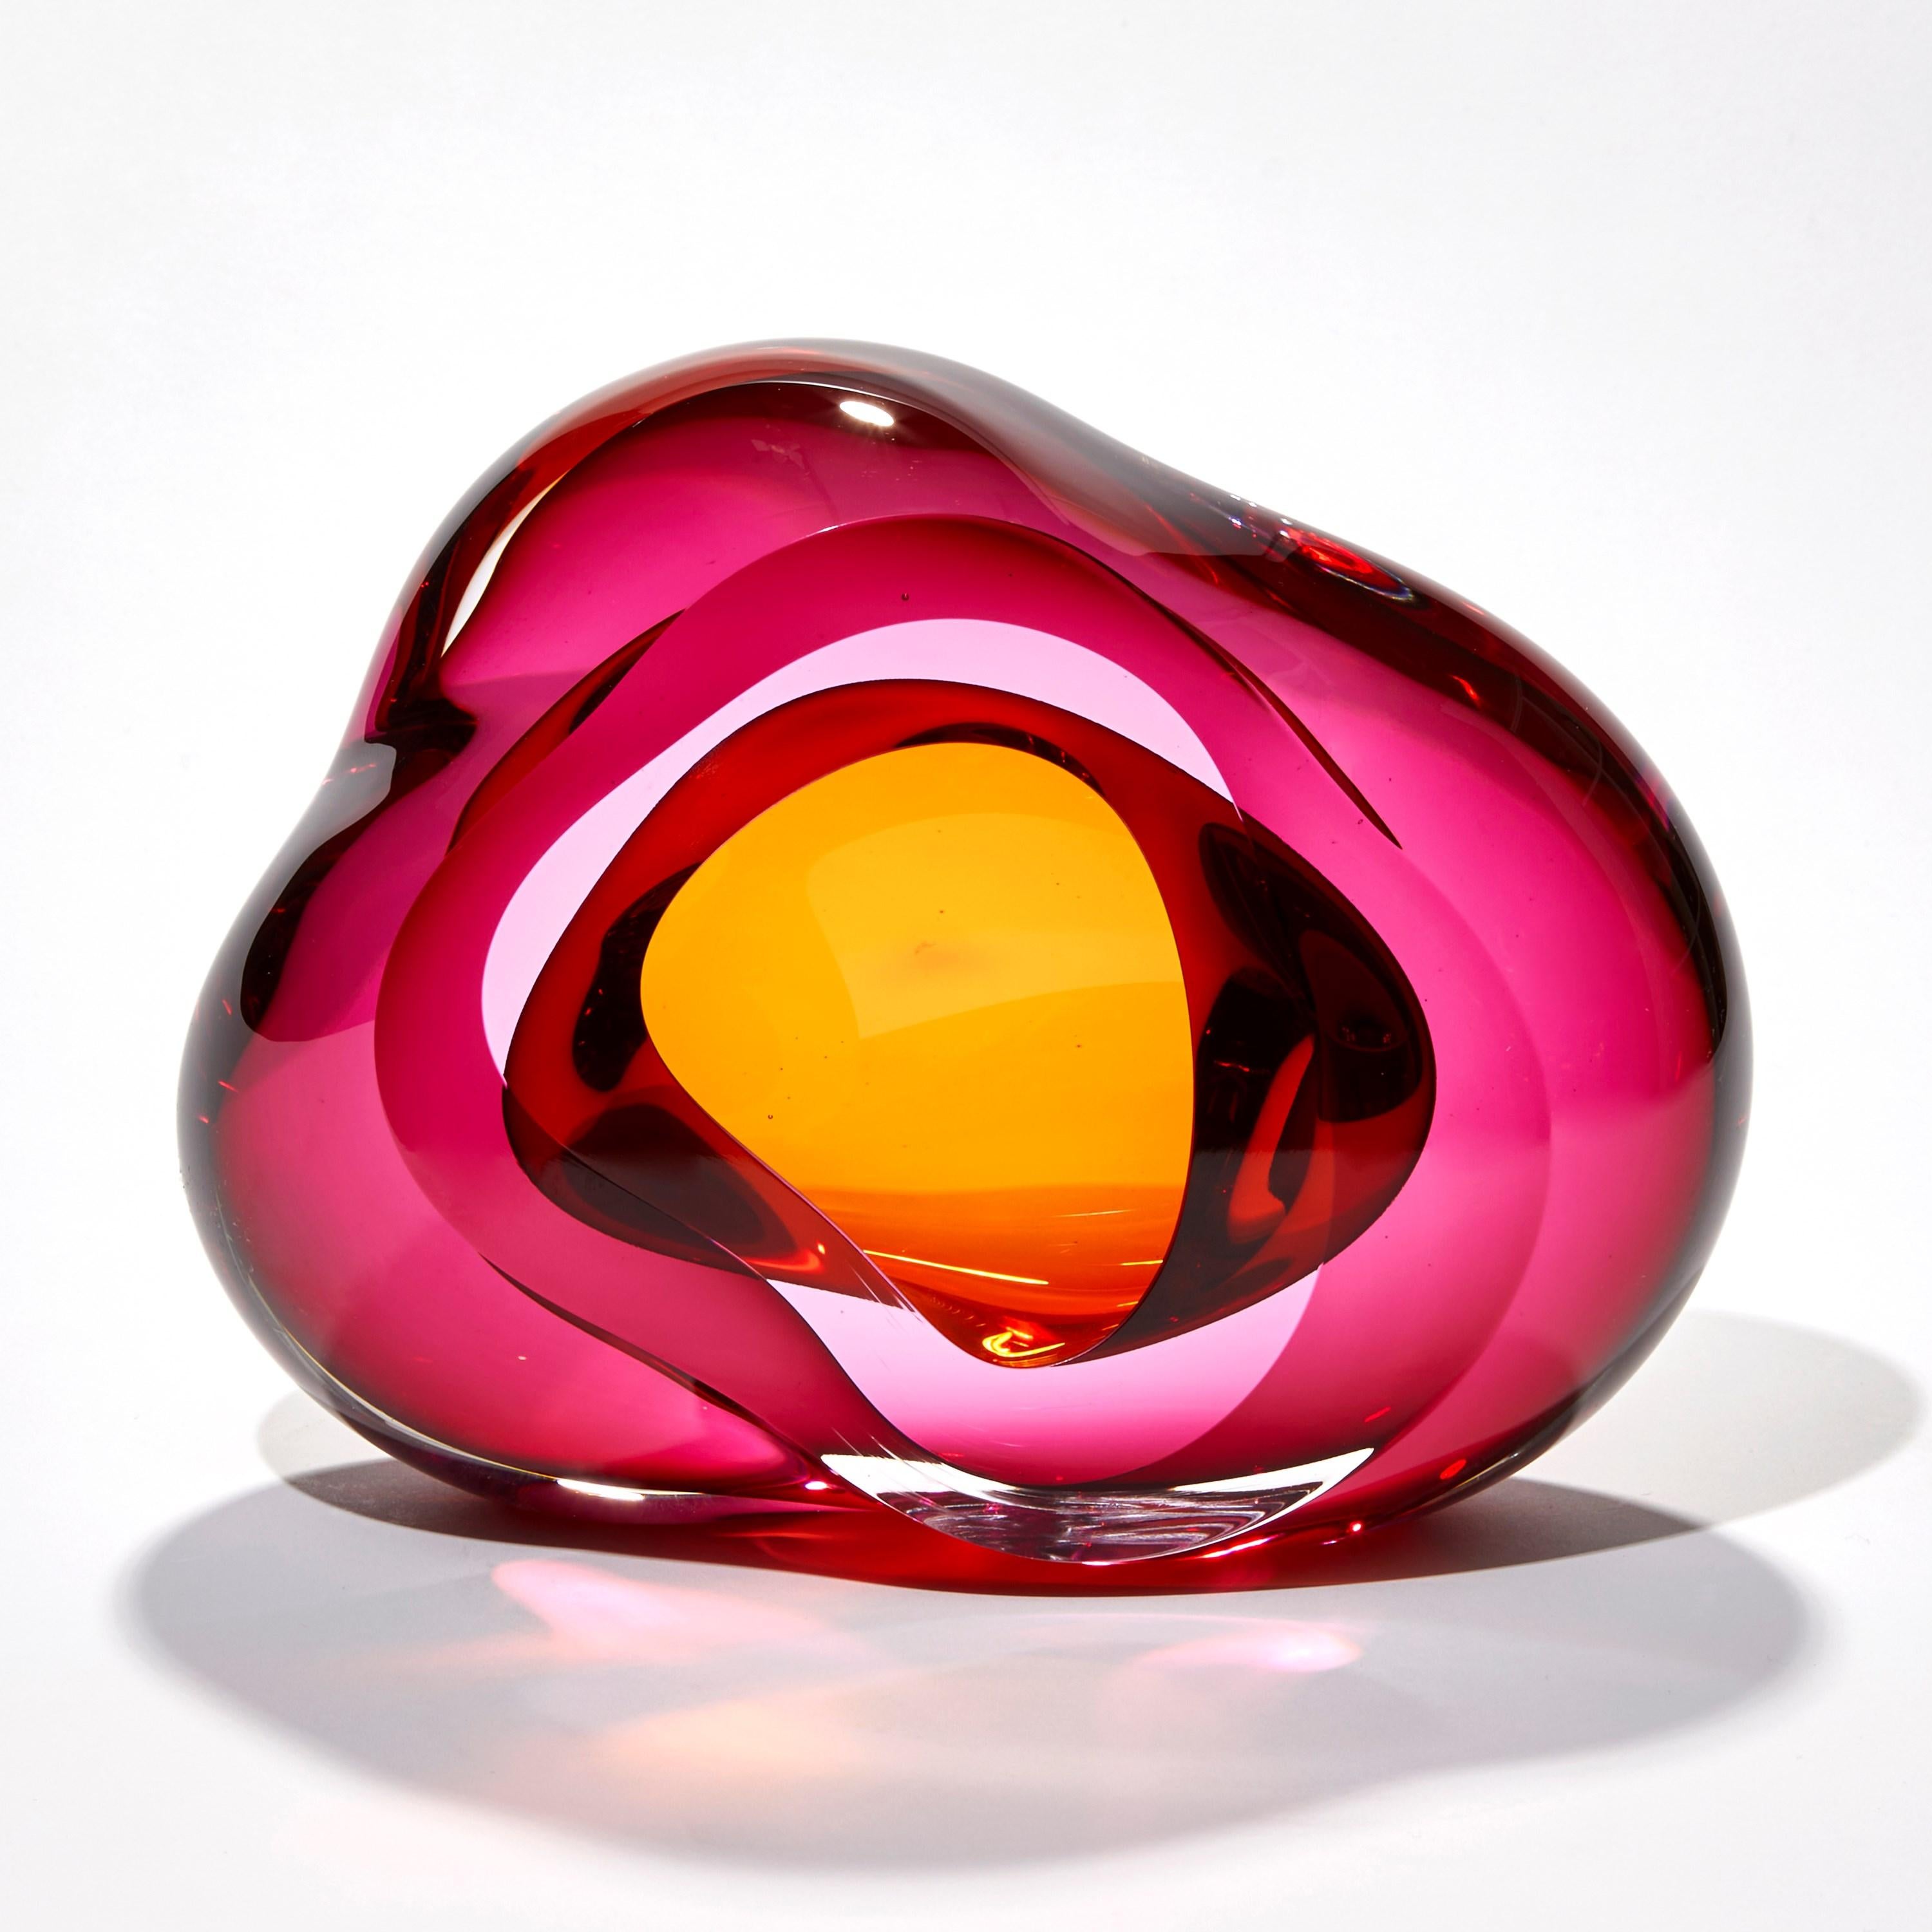 'Vug in Fuchsia & Gold II' is a unique handblown sculpture by the British artist, Samantha Donaldson.

Created by layers of coloured glass in fuchsia pink and amber/gold, the transparent colours merge and create further hues throughout the piece.